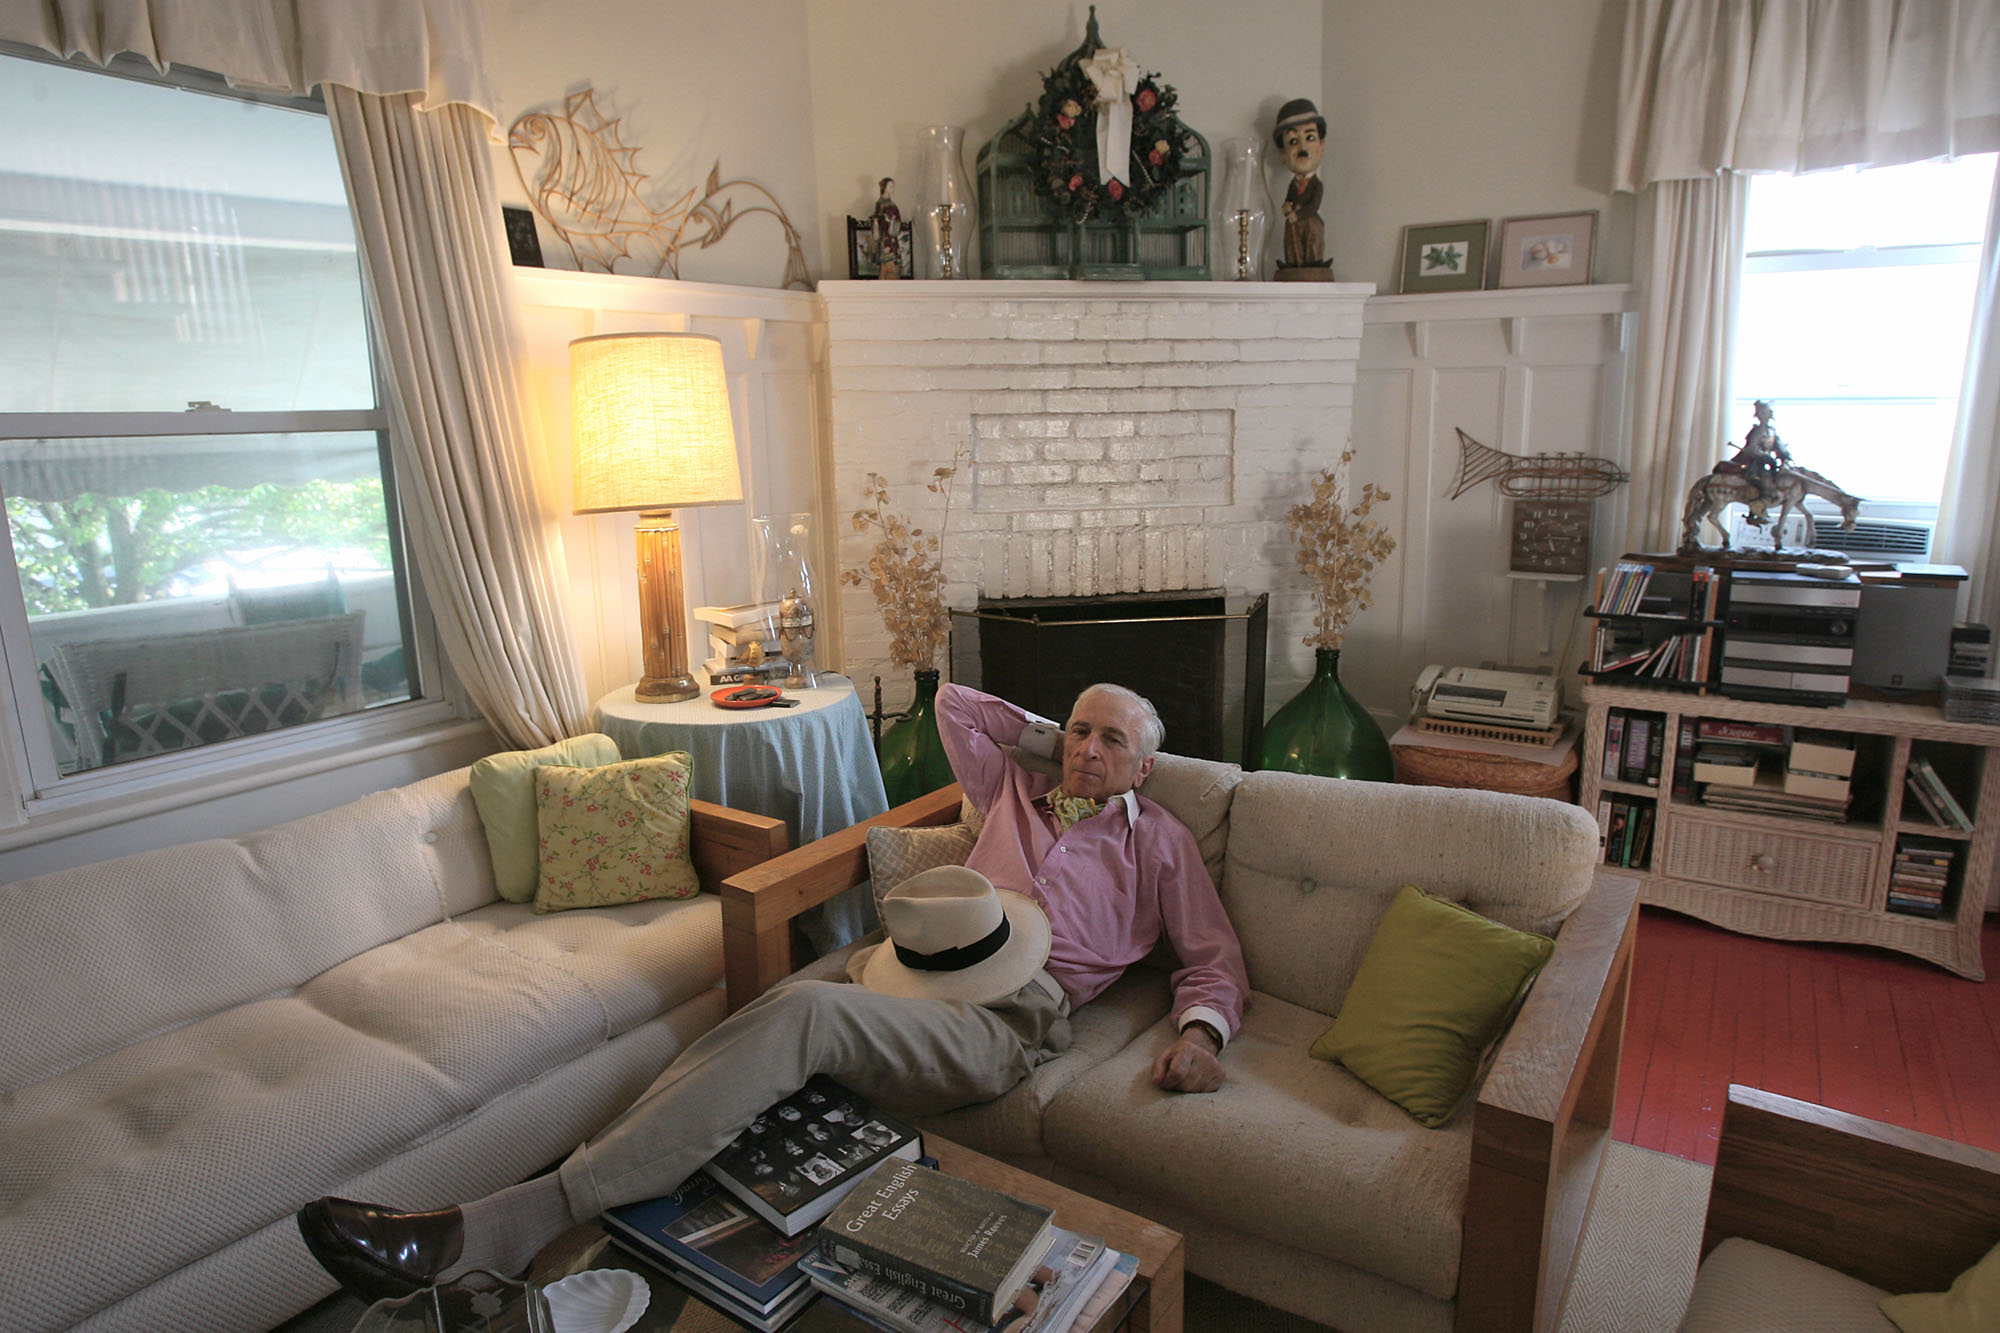 Author Gay Talese at sumer home-New Jersey Portrait Photographer